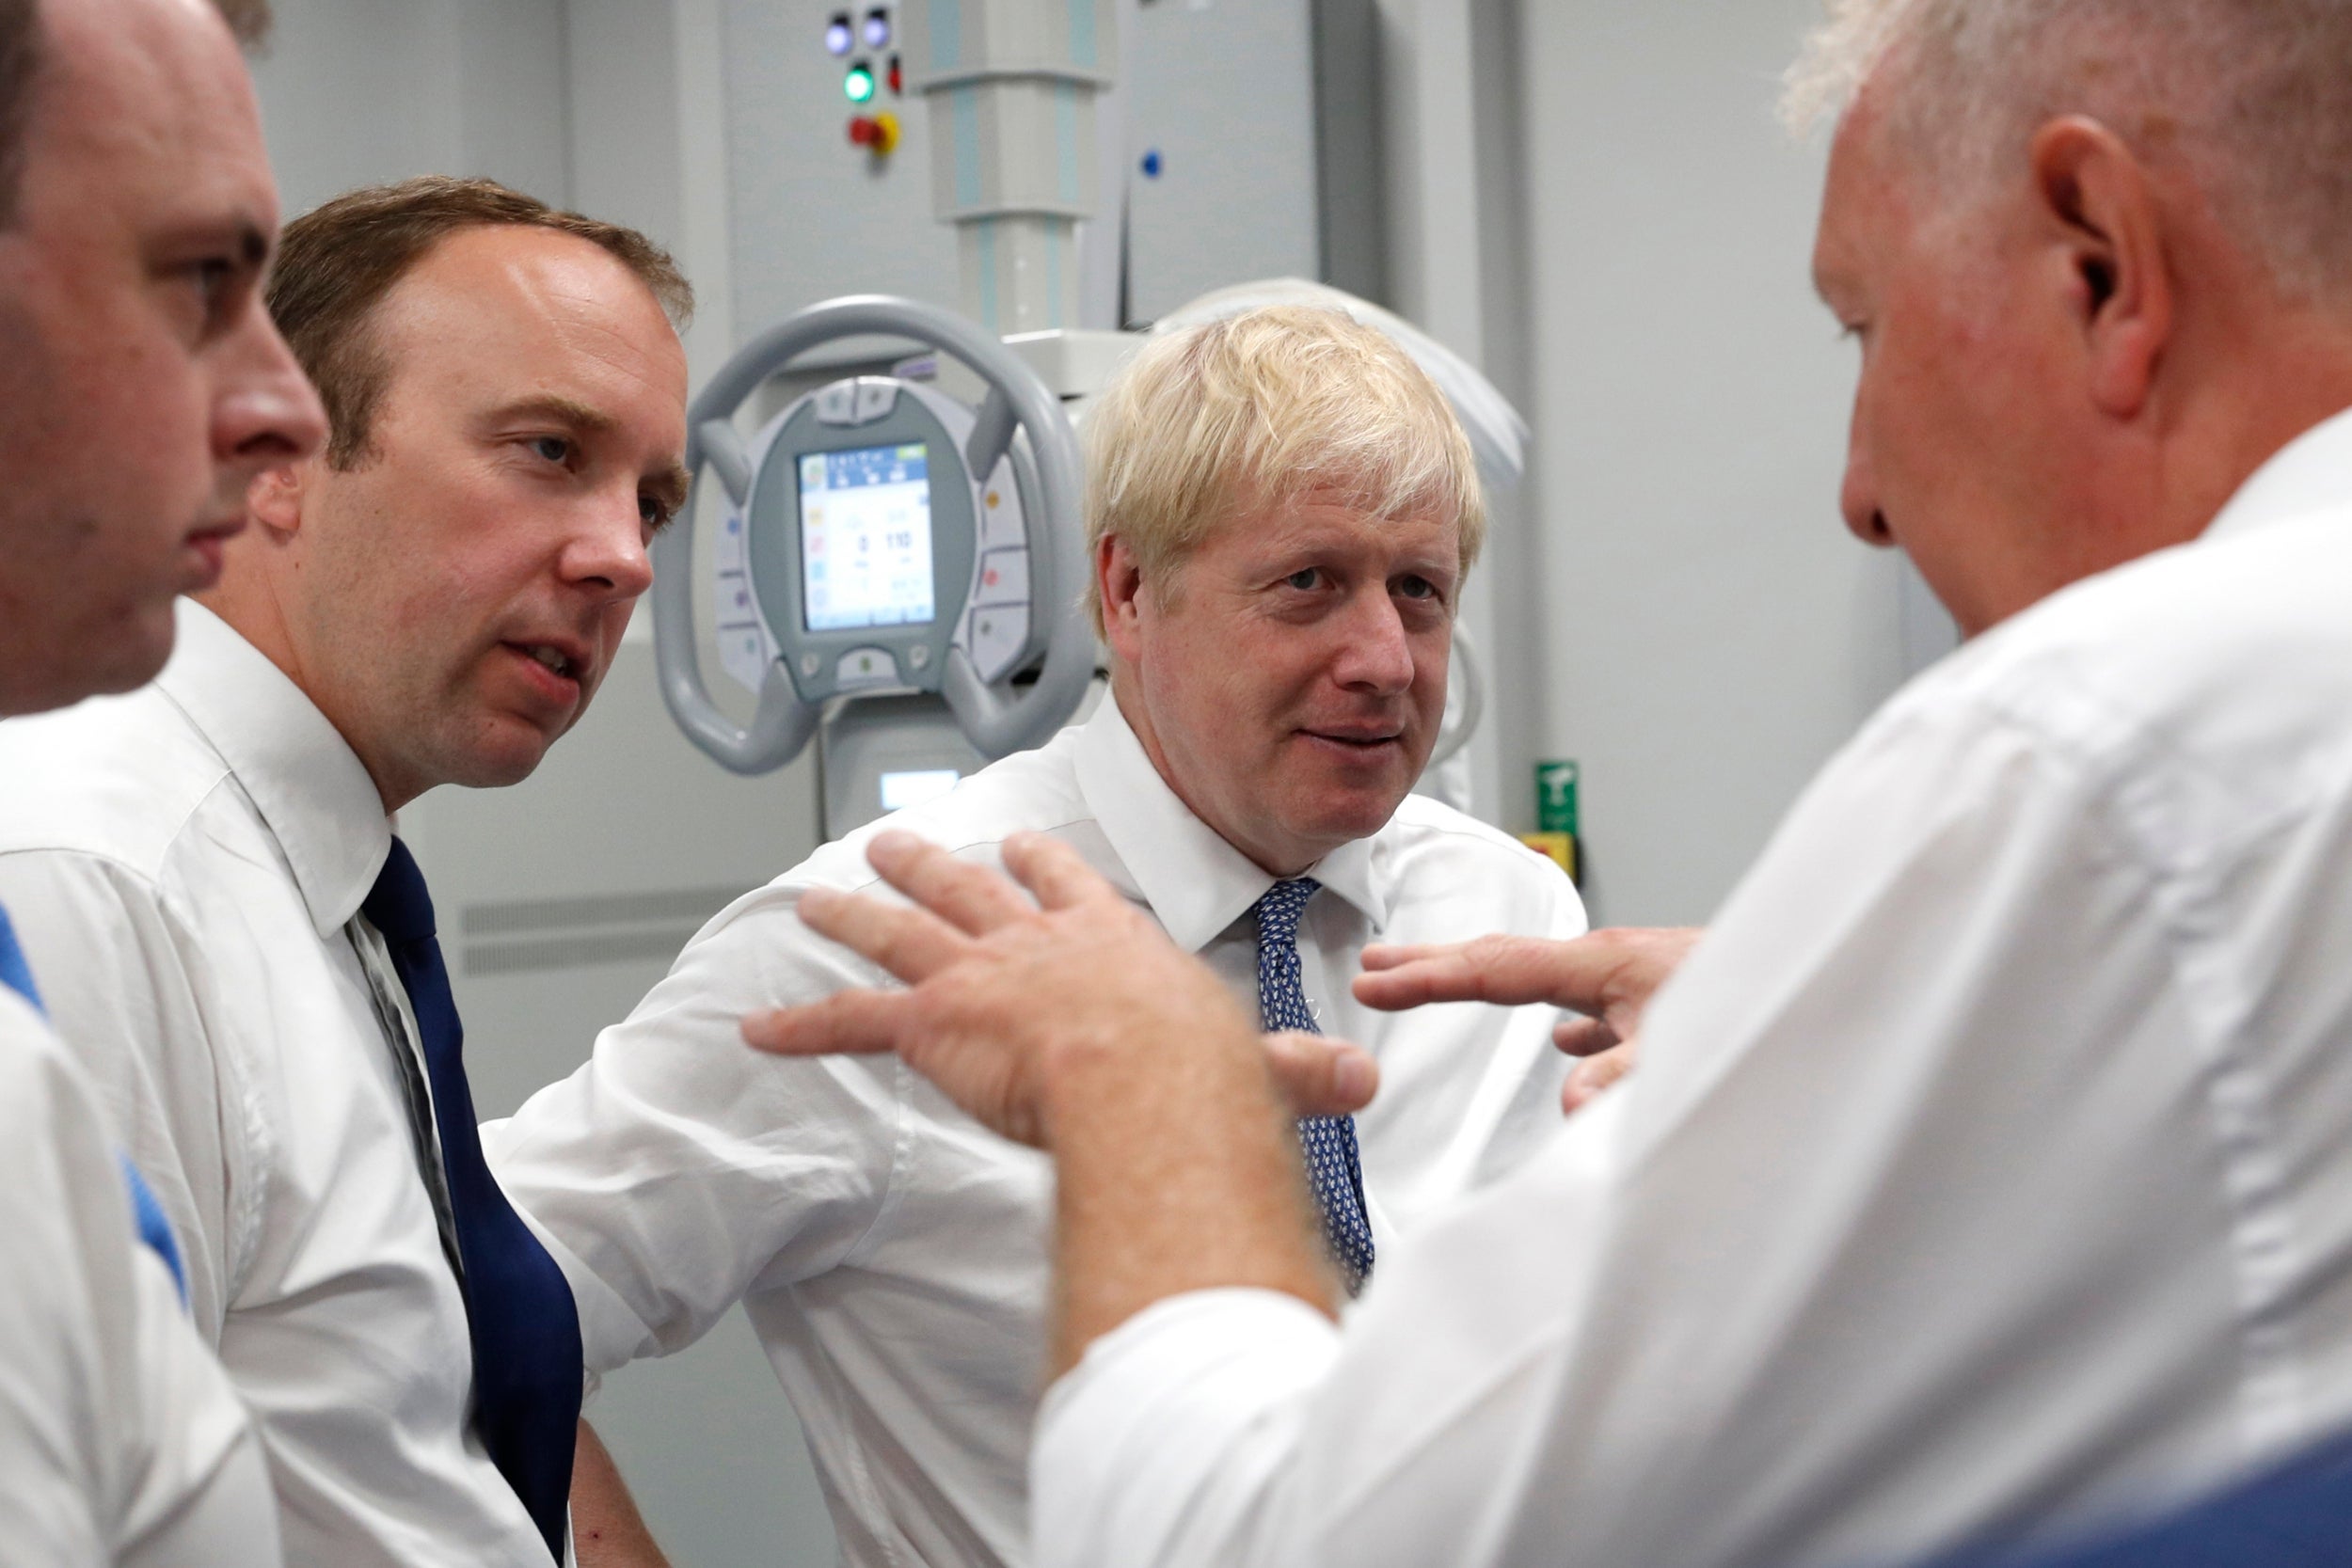 The PM visits a hospital earlier this year